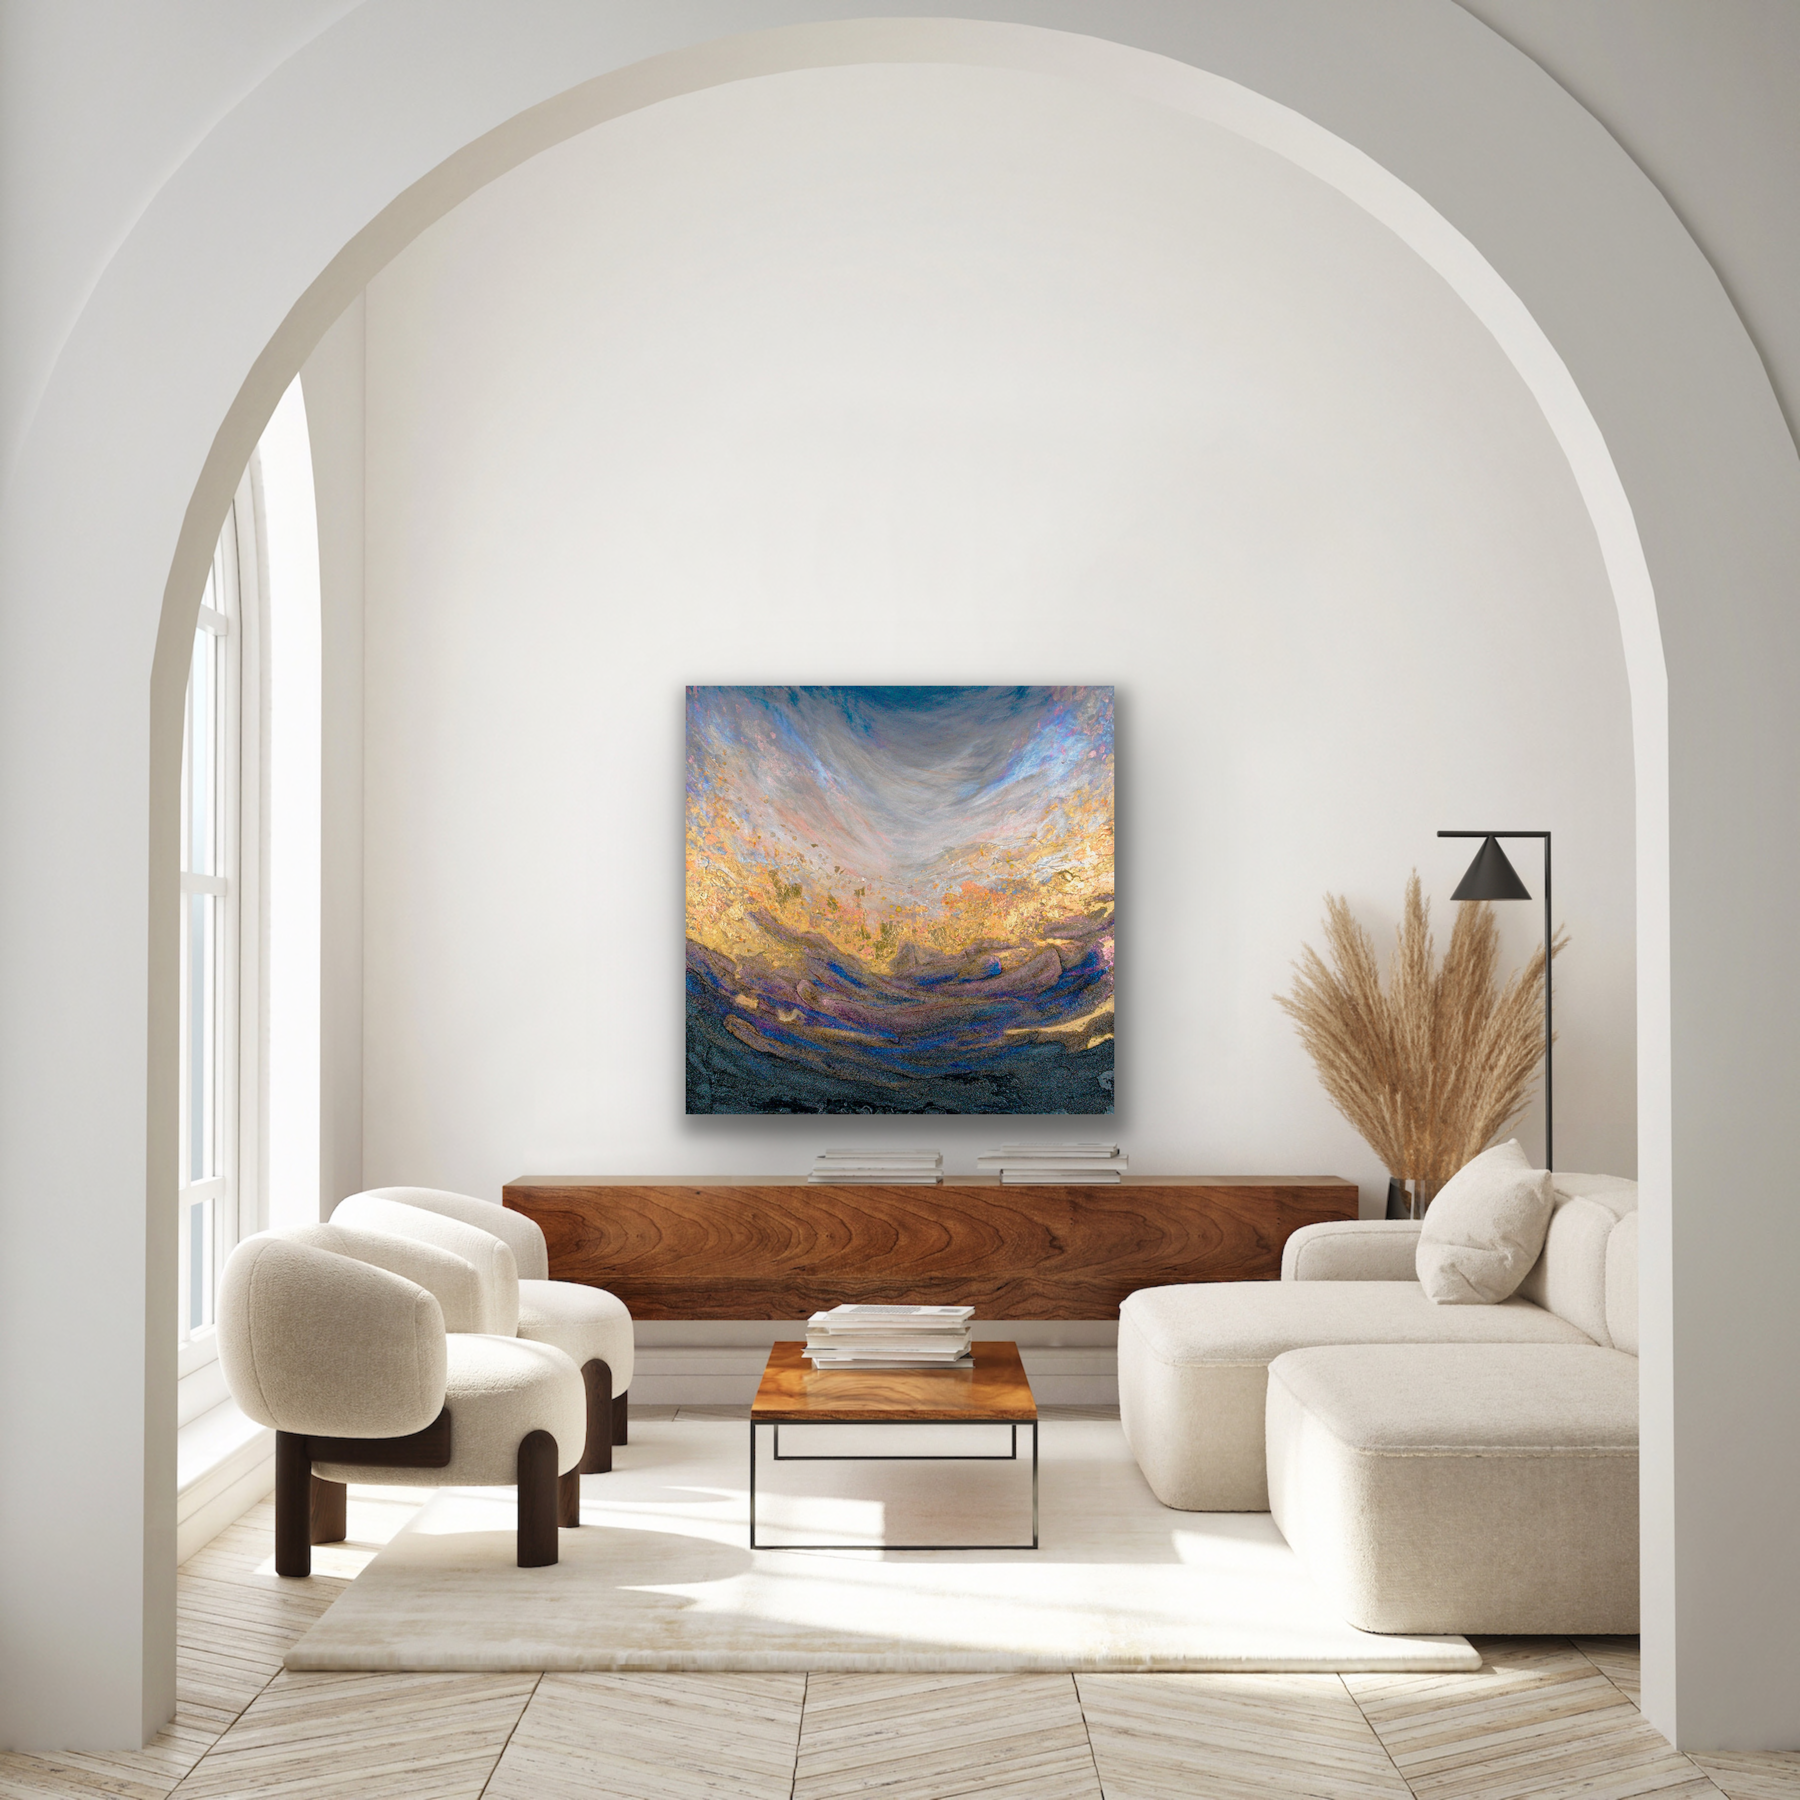 This abstract work of art will make a stunning addition to your living room.